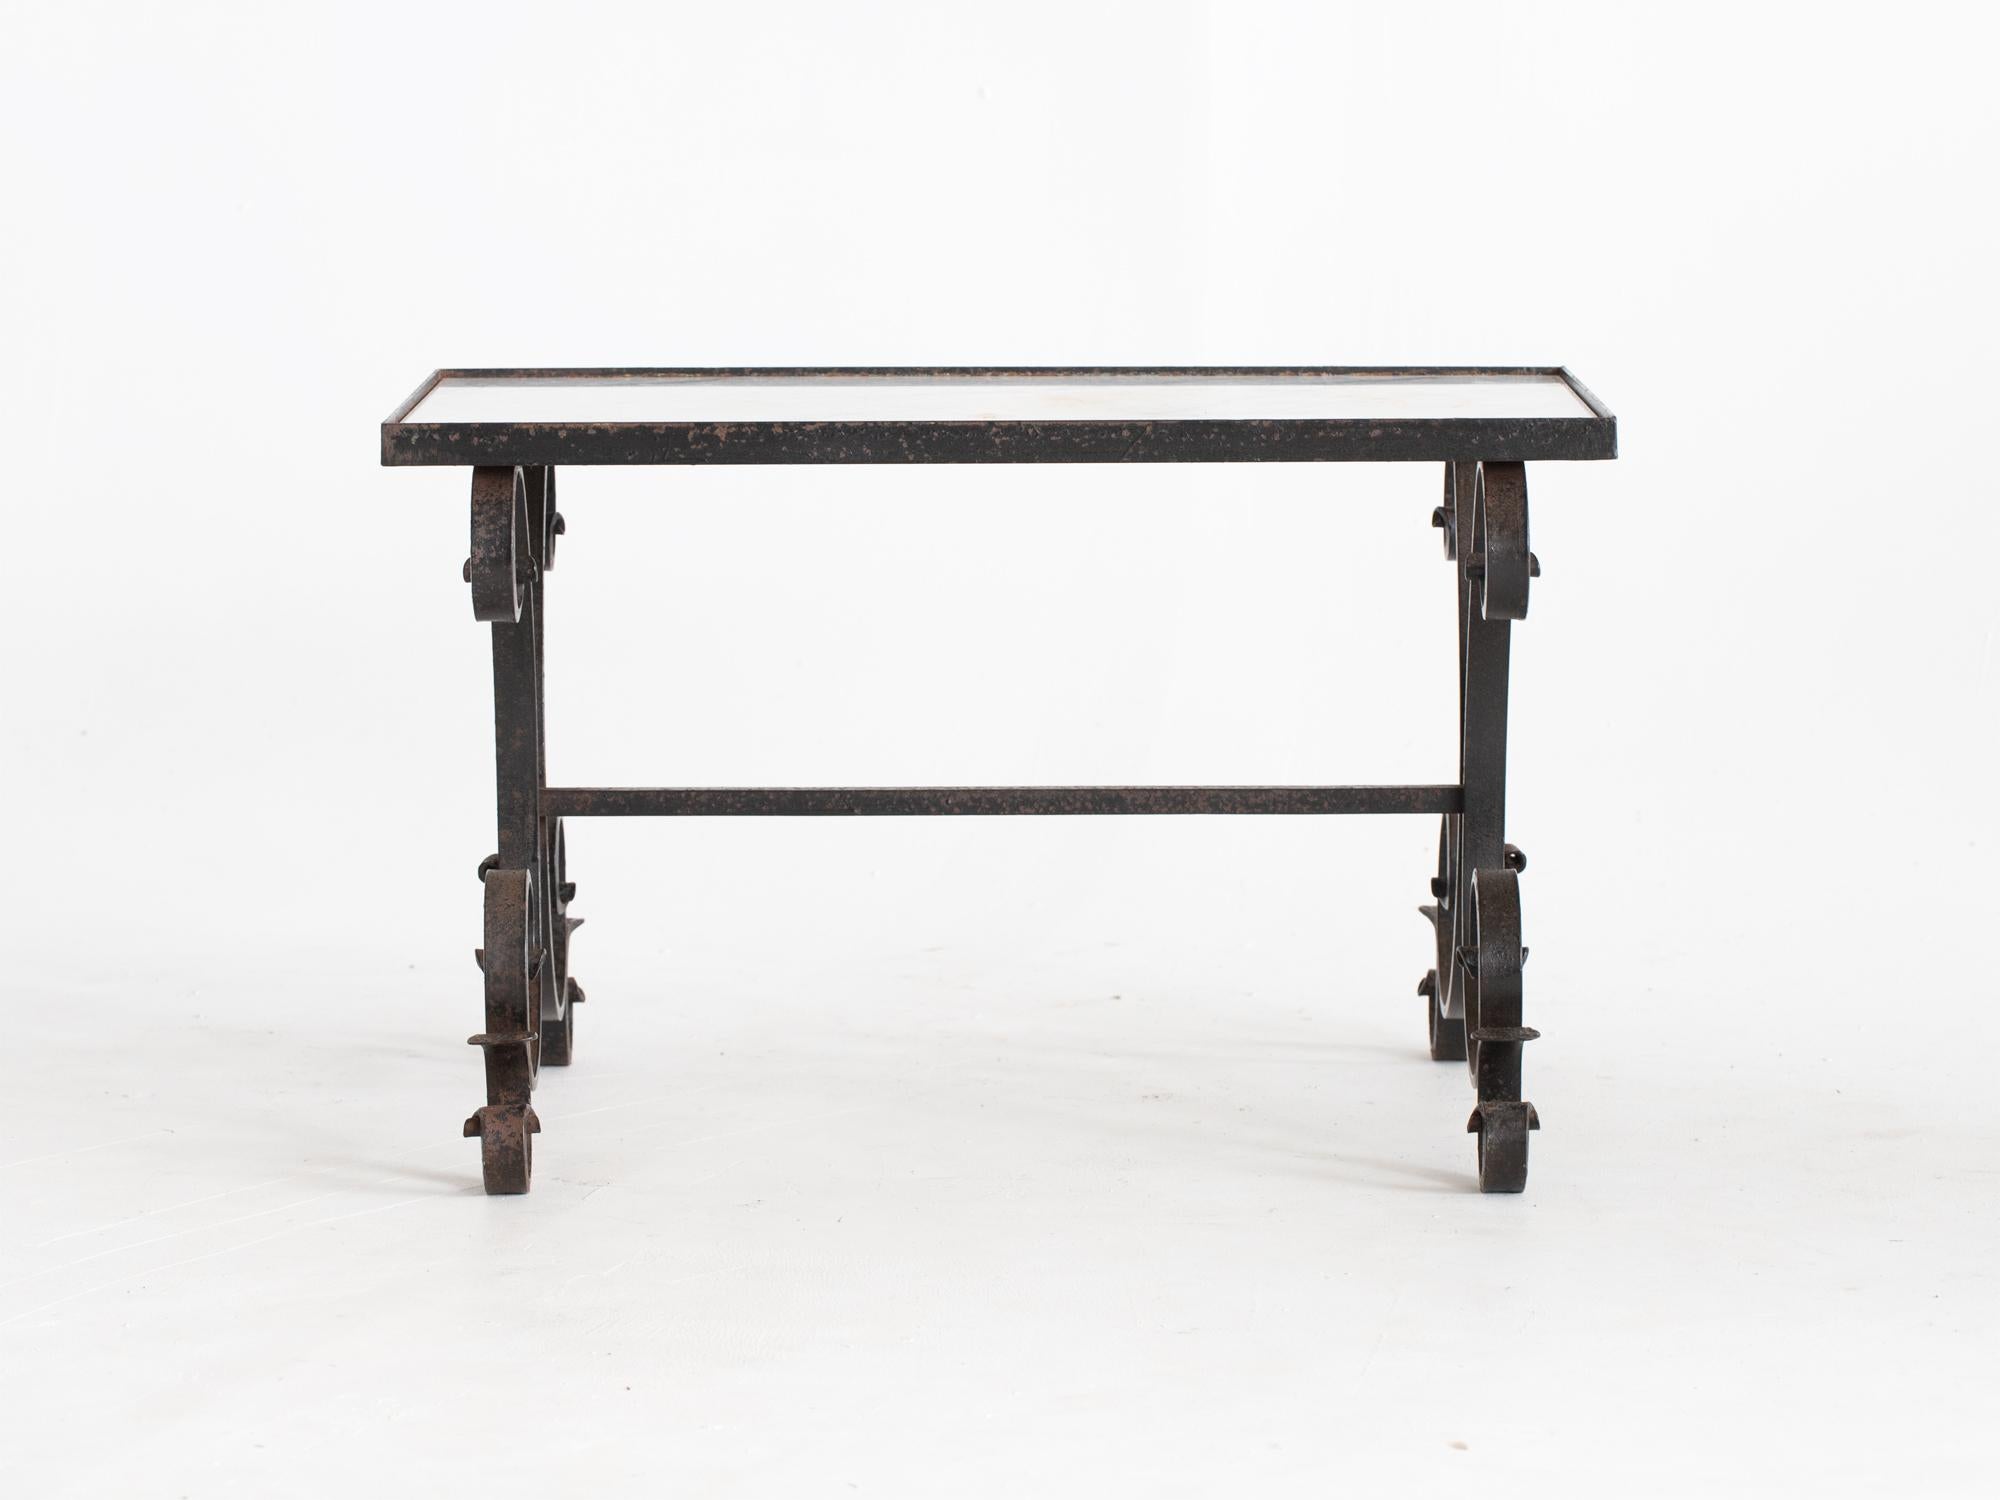 A forged iron coffee or side table with Carrara marble top. French, c. 1950s.

Stock ref. #2248

44.5 x 71 x 52 cm (17.5 x 28.0 x 20.5 